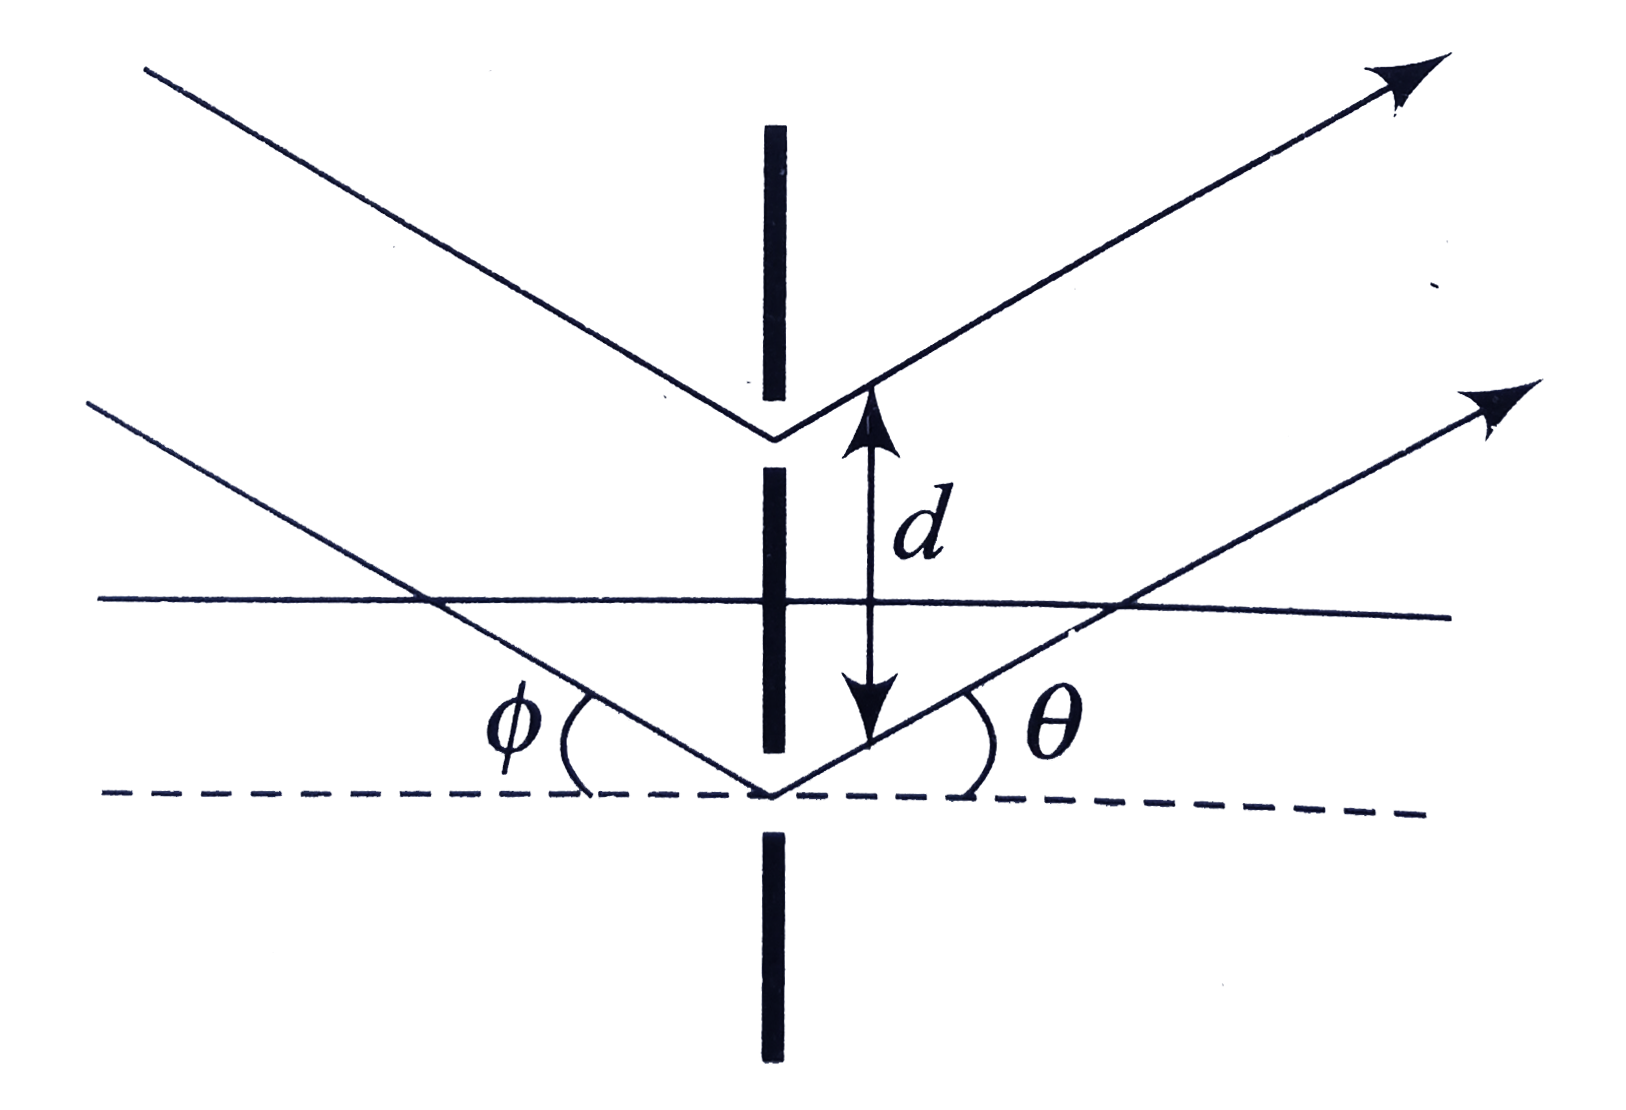 Light is incident at an angle phi with the normal to a plane containing two slits of separation d. Select the expression that correctly describes the positions of the interference maxima in terms of the incoming angle phi and outgoing angle theta.